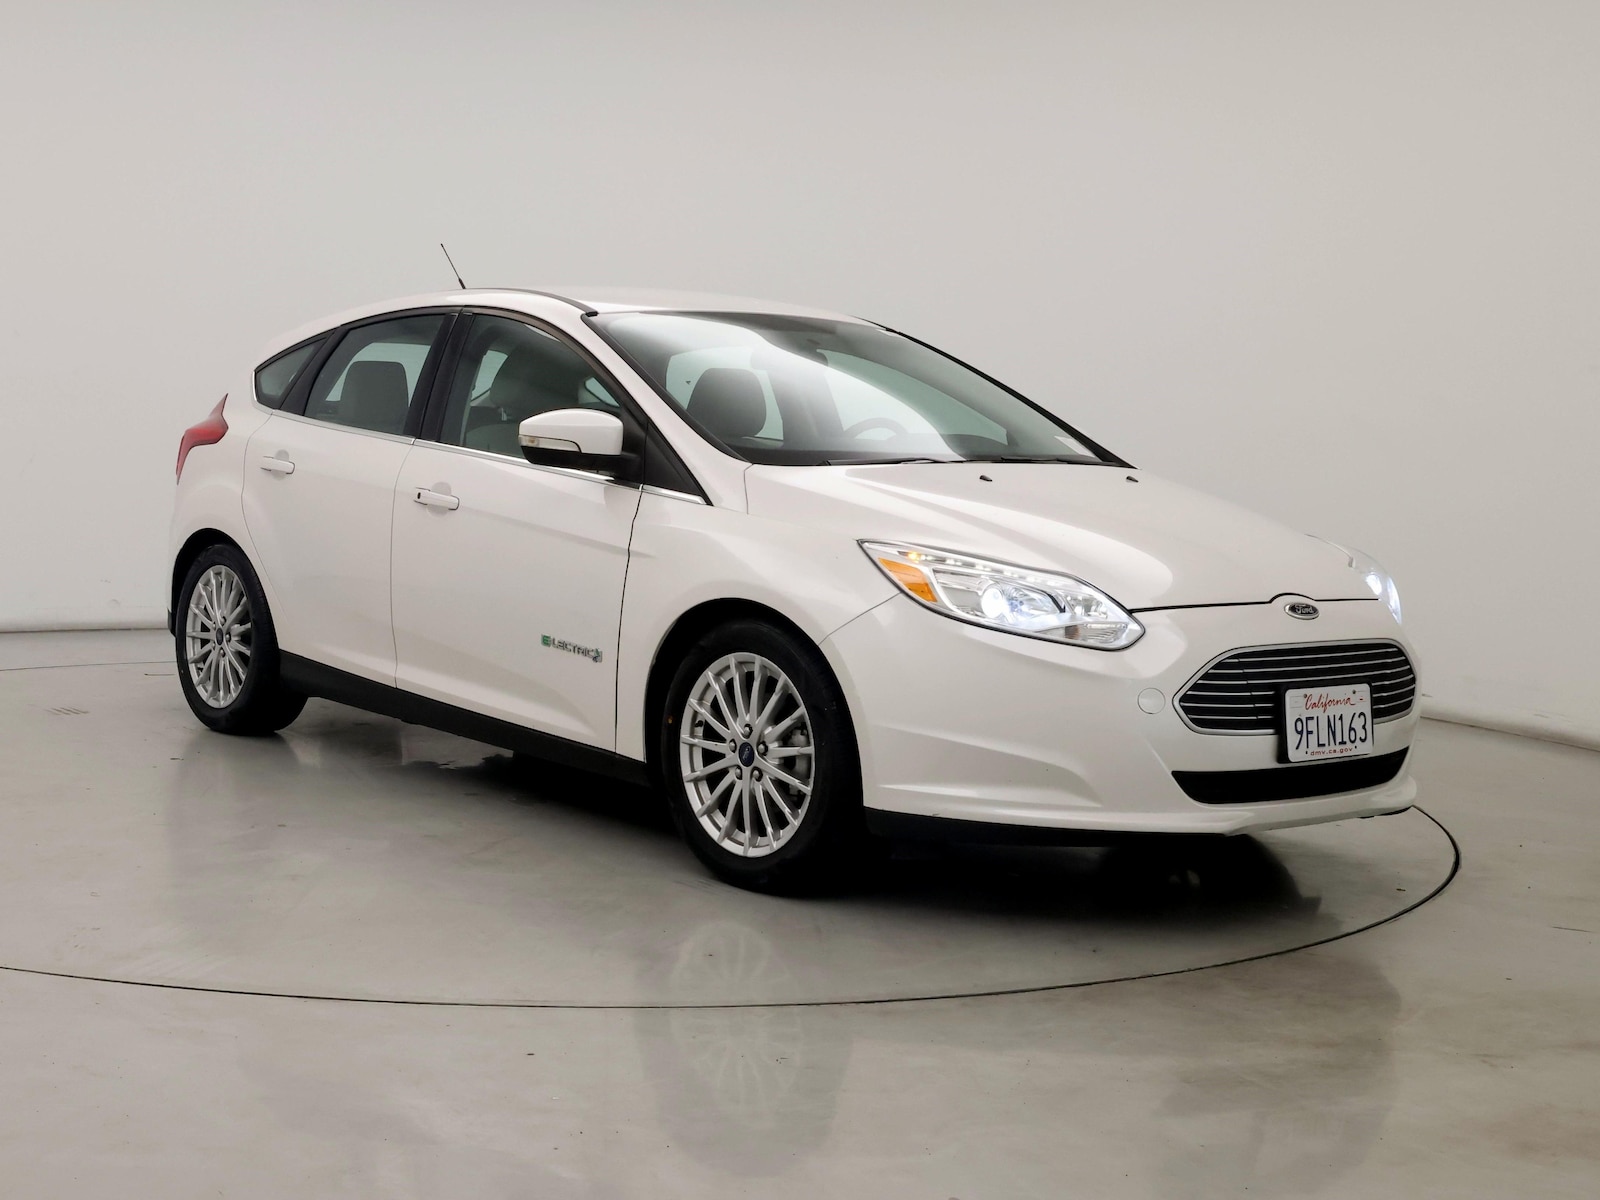 Used 2014 Ford Focus Electric with VIN 1FADP3R43EL230471 for sale in Kenosha, WI